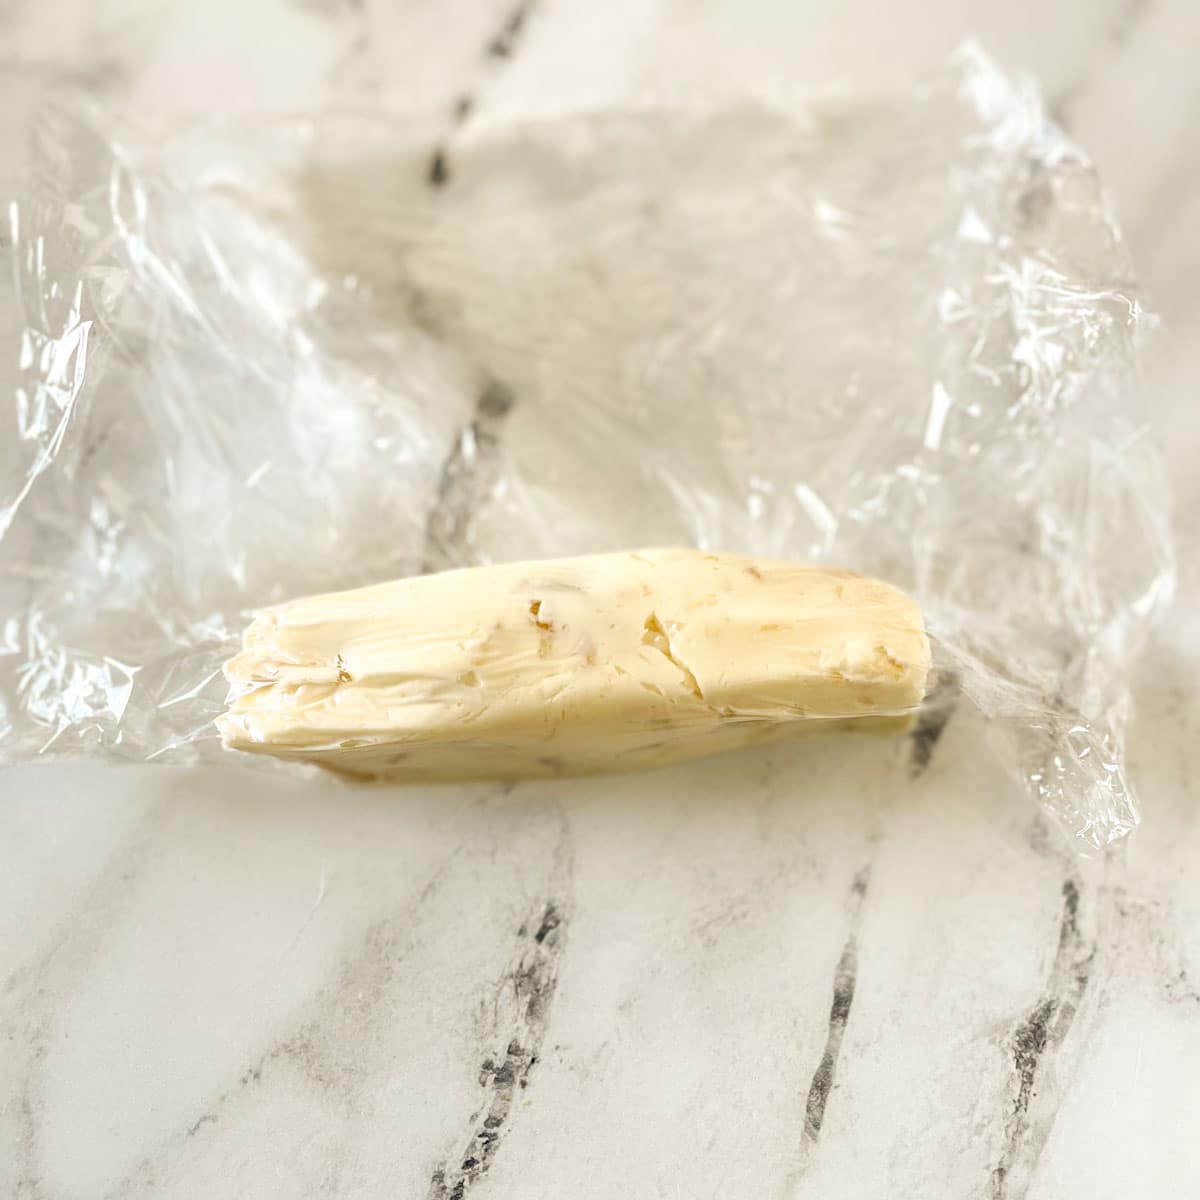 Roasted garlic butter is shaped into a log in a piece of plastic wrap.